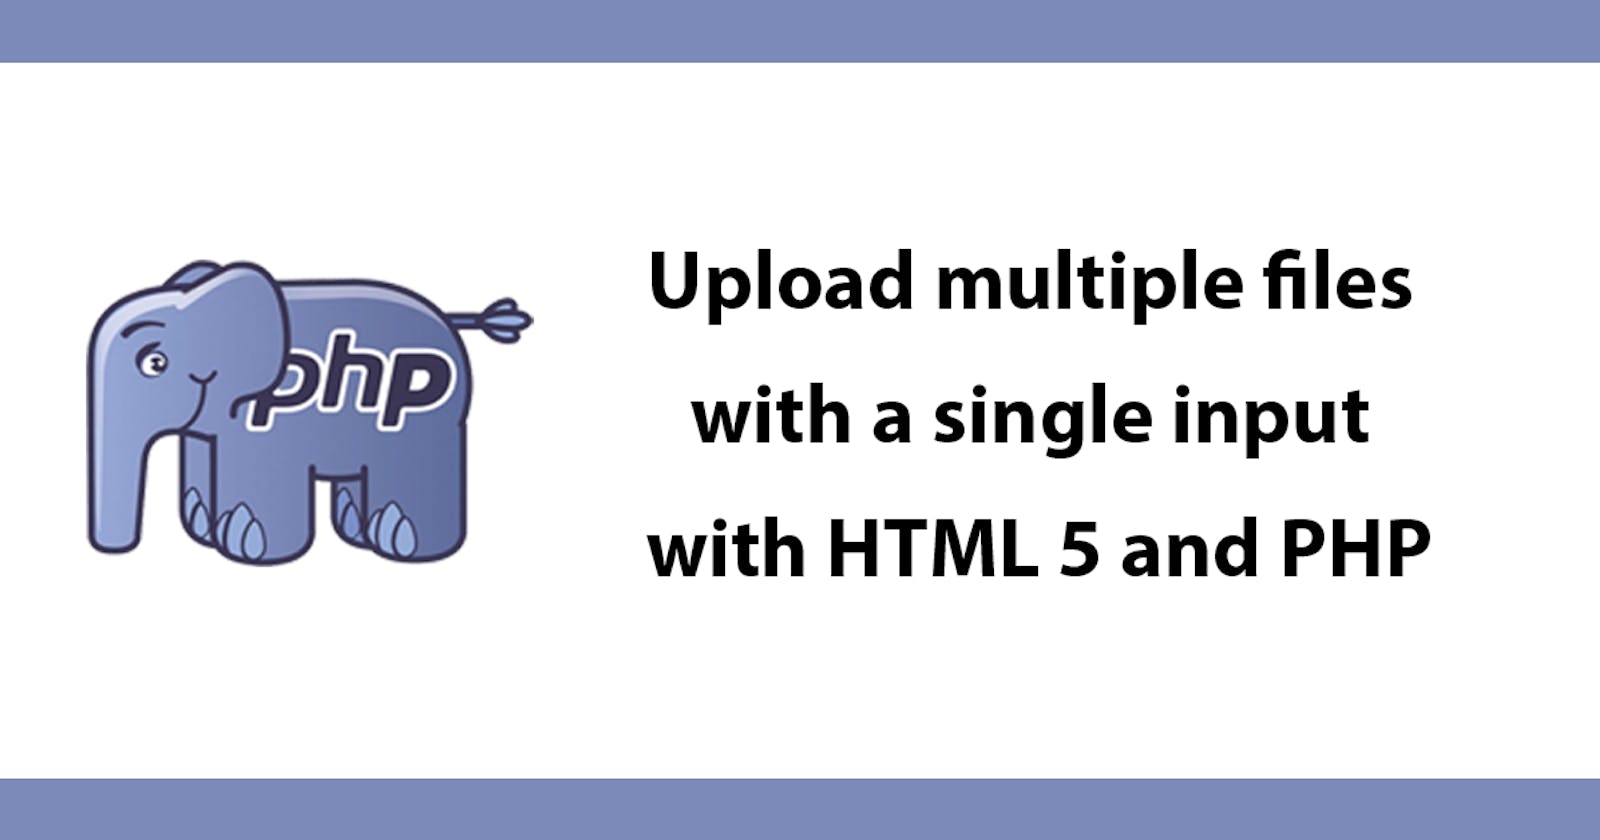 Upload multiple files with a single input with HTML 5 and PHP